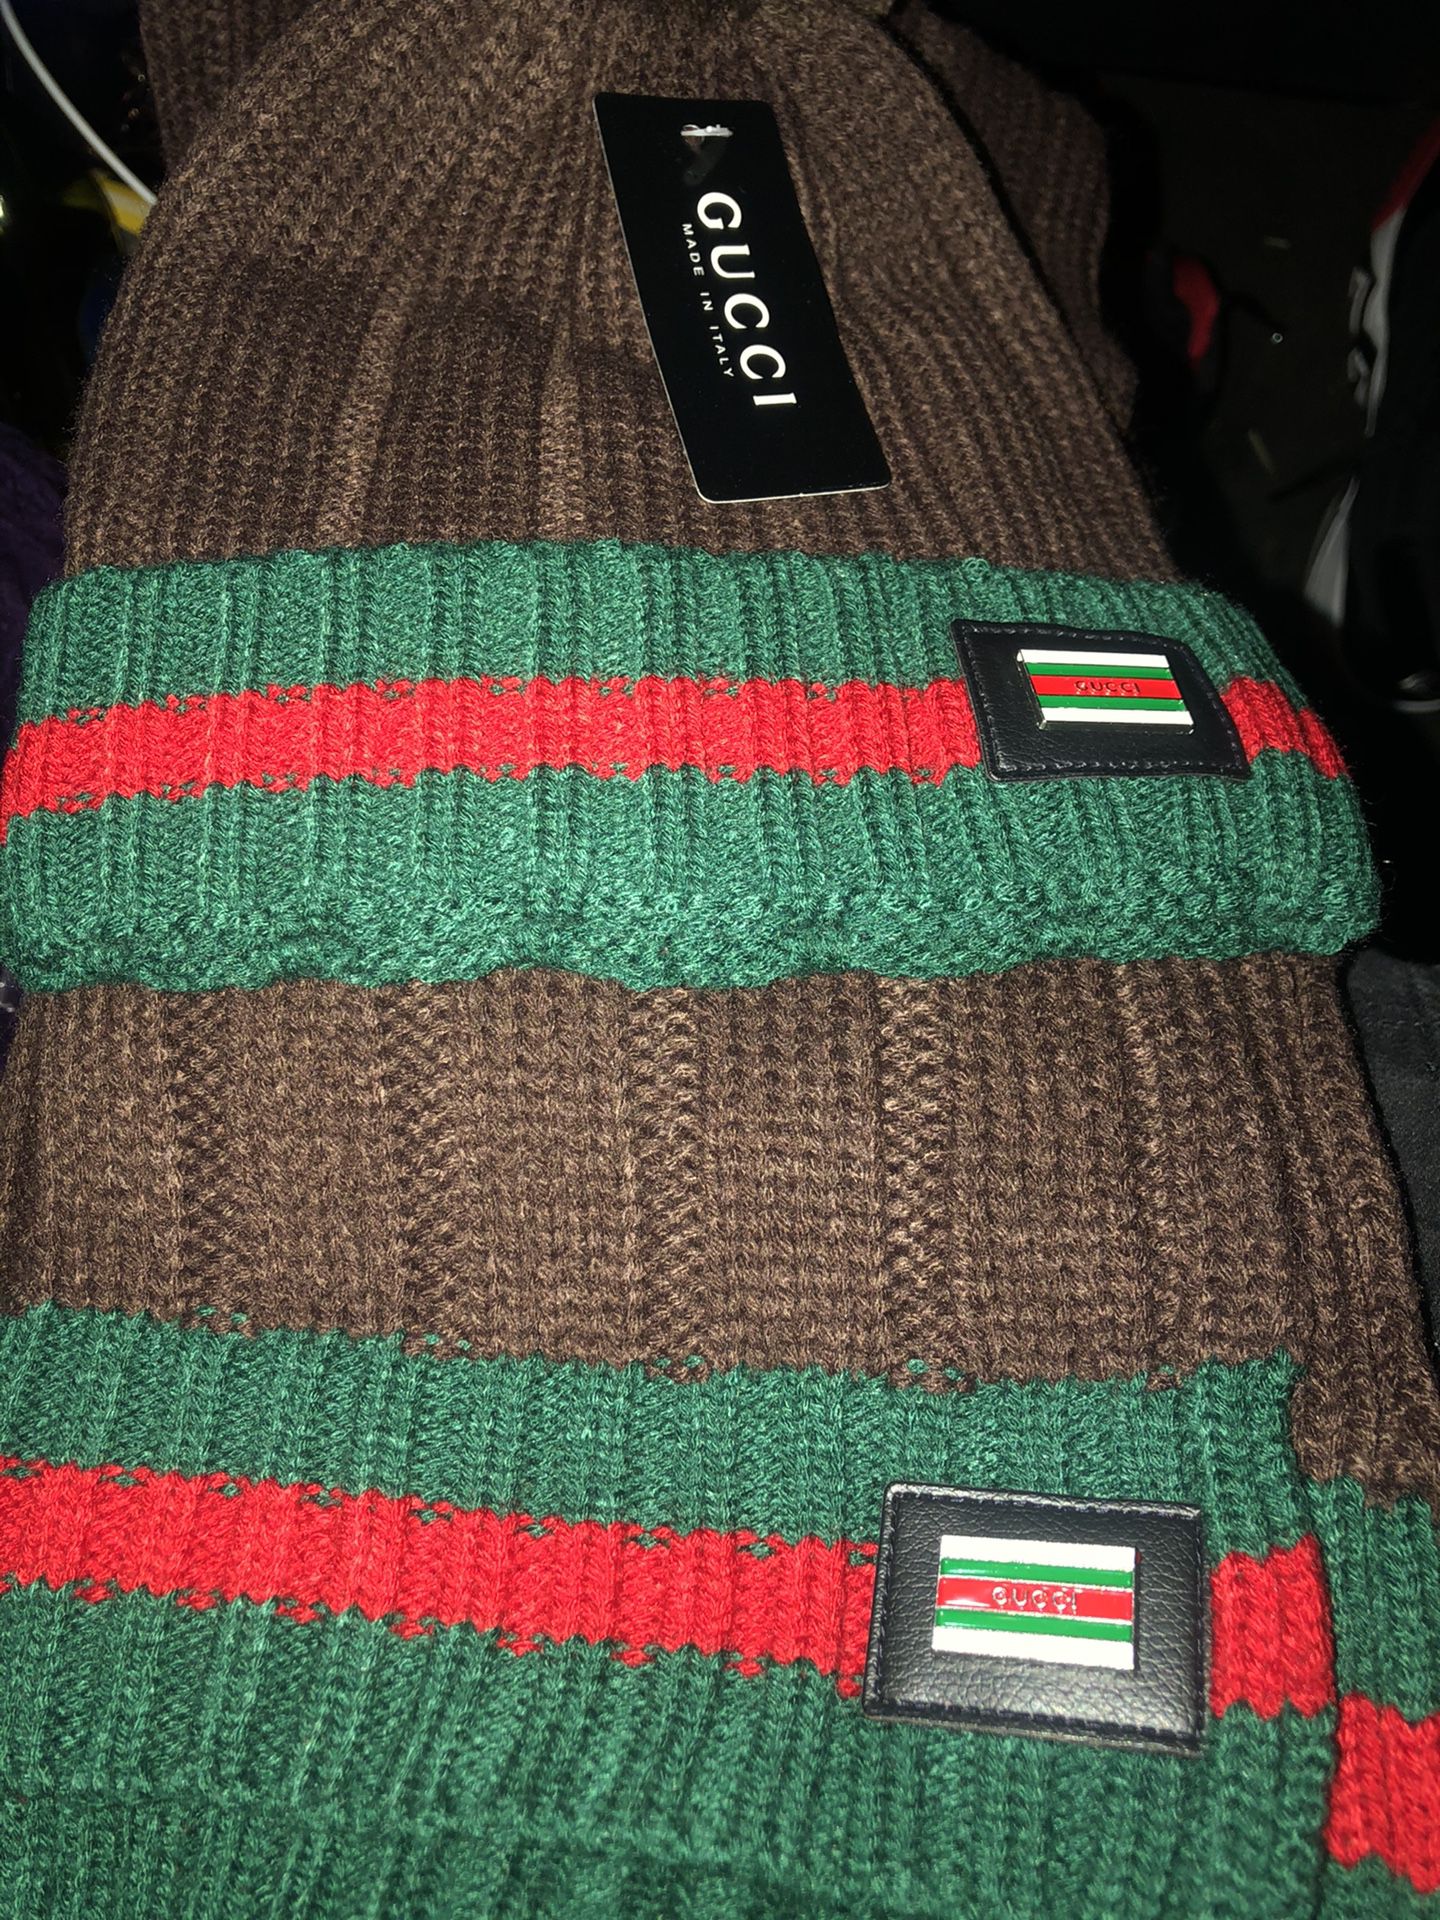 Gucci Beenie & scar brand new wit tags